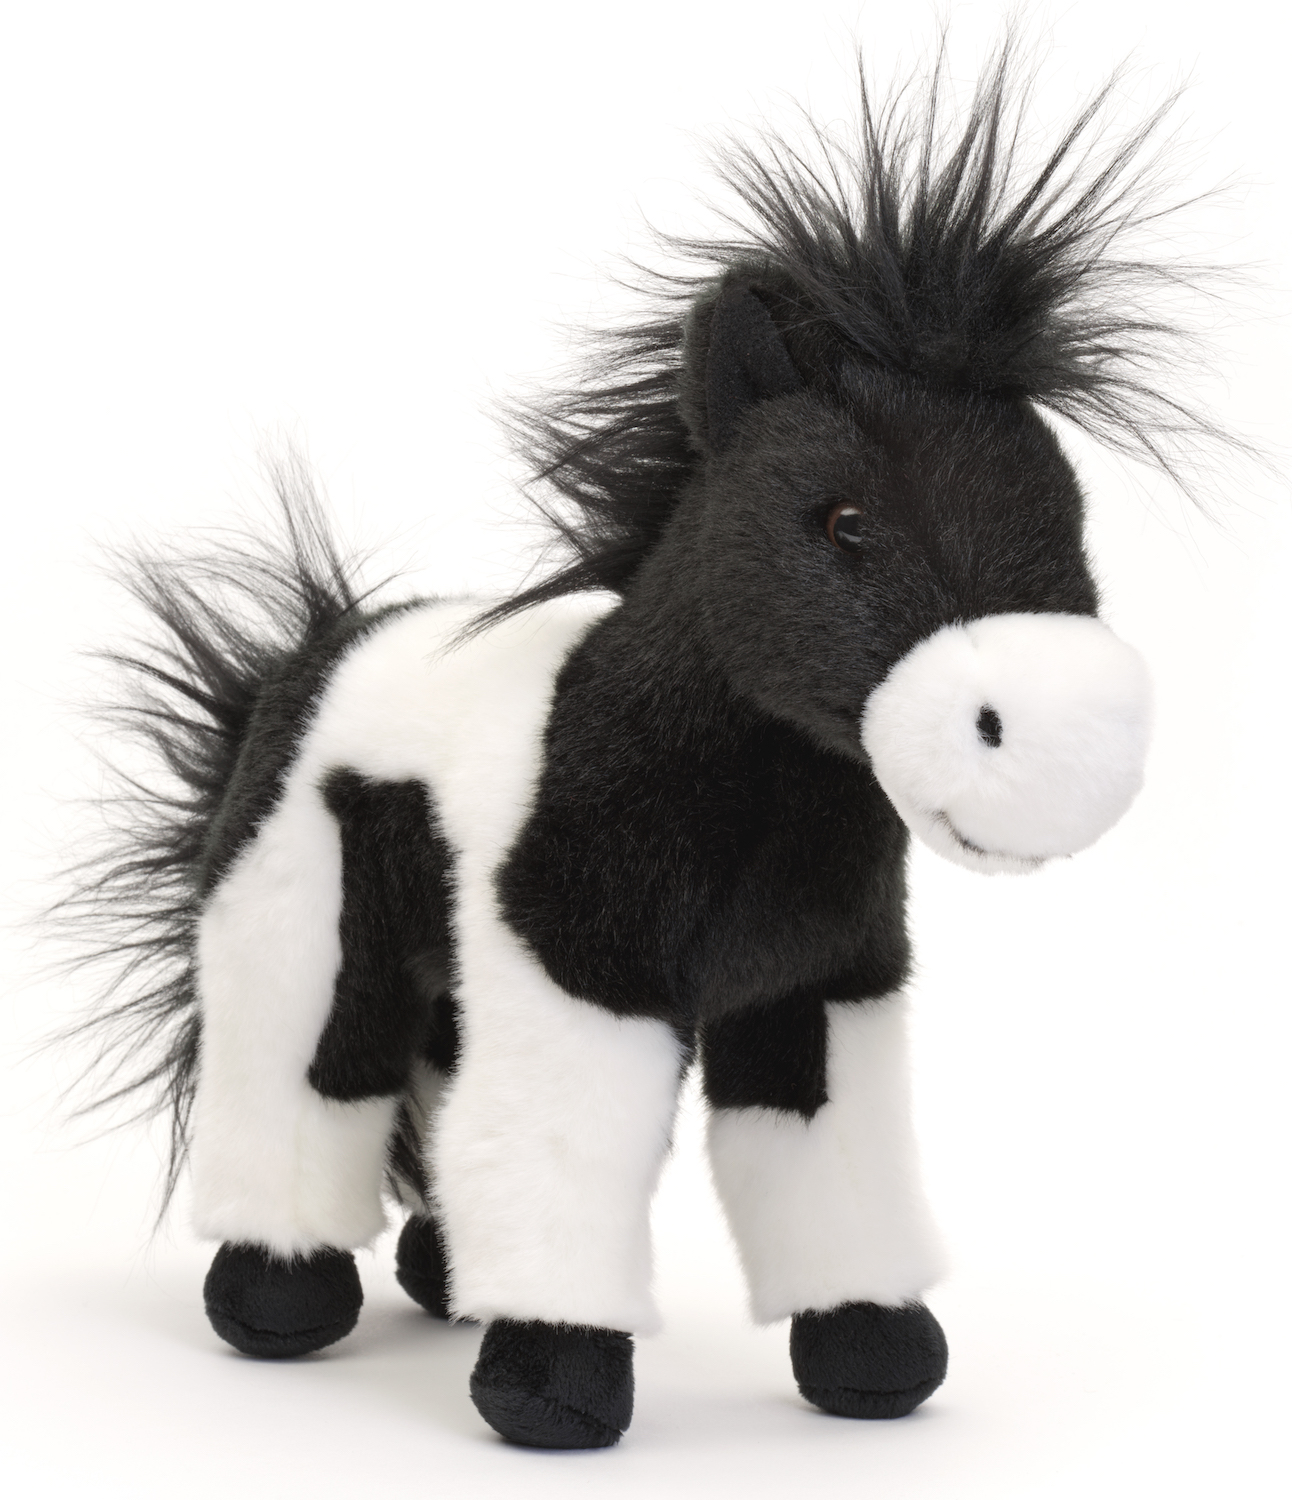 Horse black and white, standing - 23 cm (height)